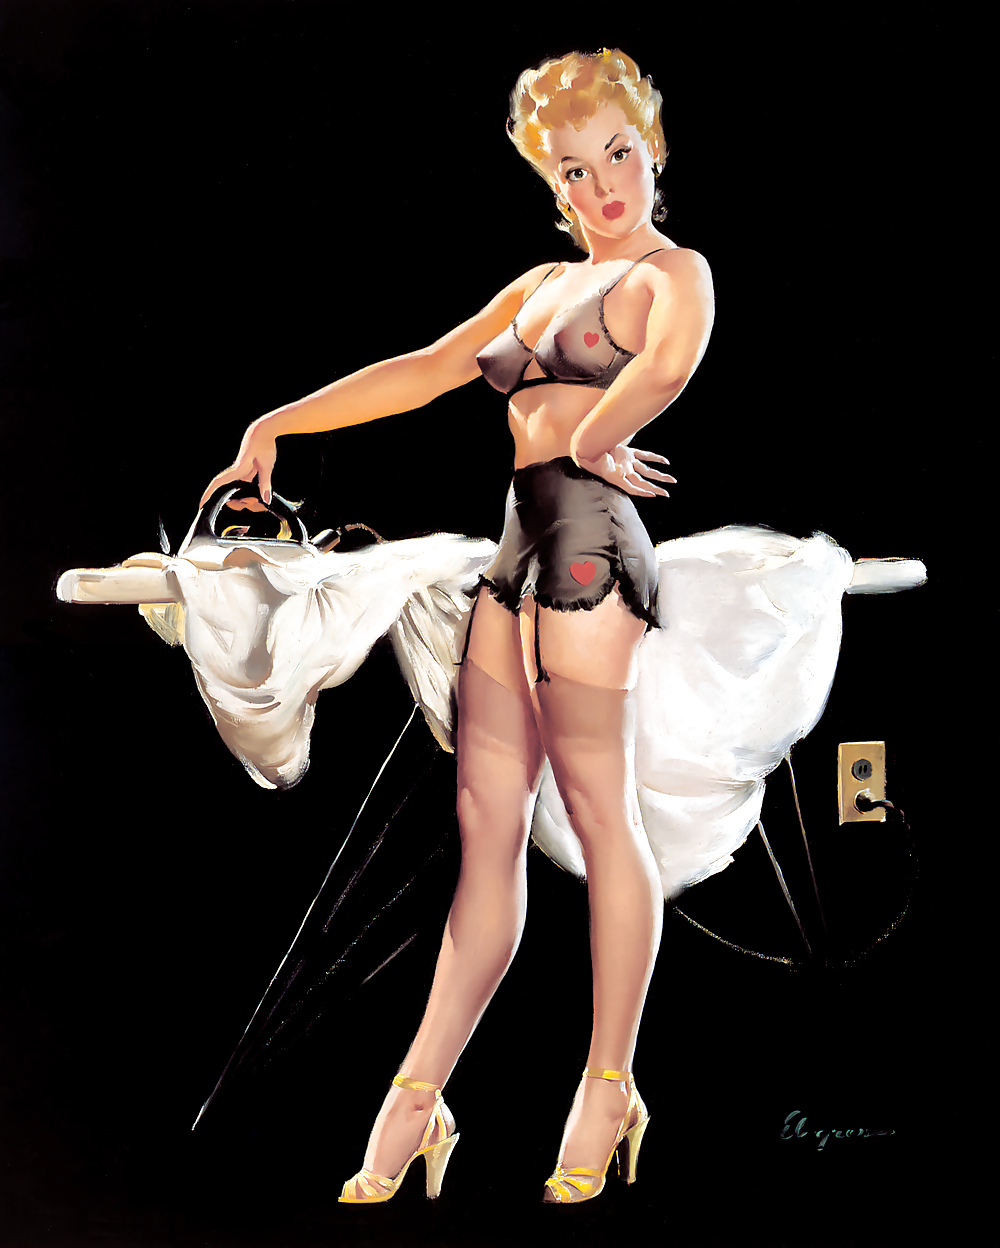 Sexy Vintage Pin - Up Art #6041950